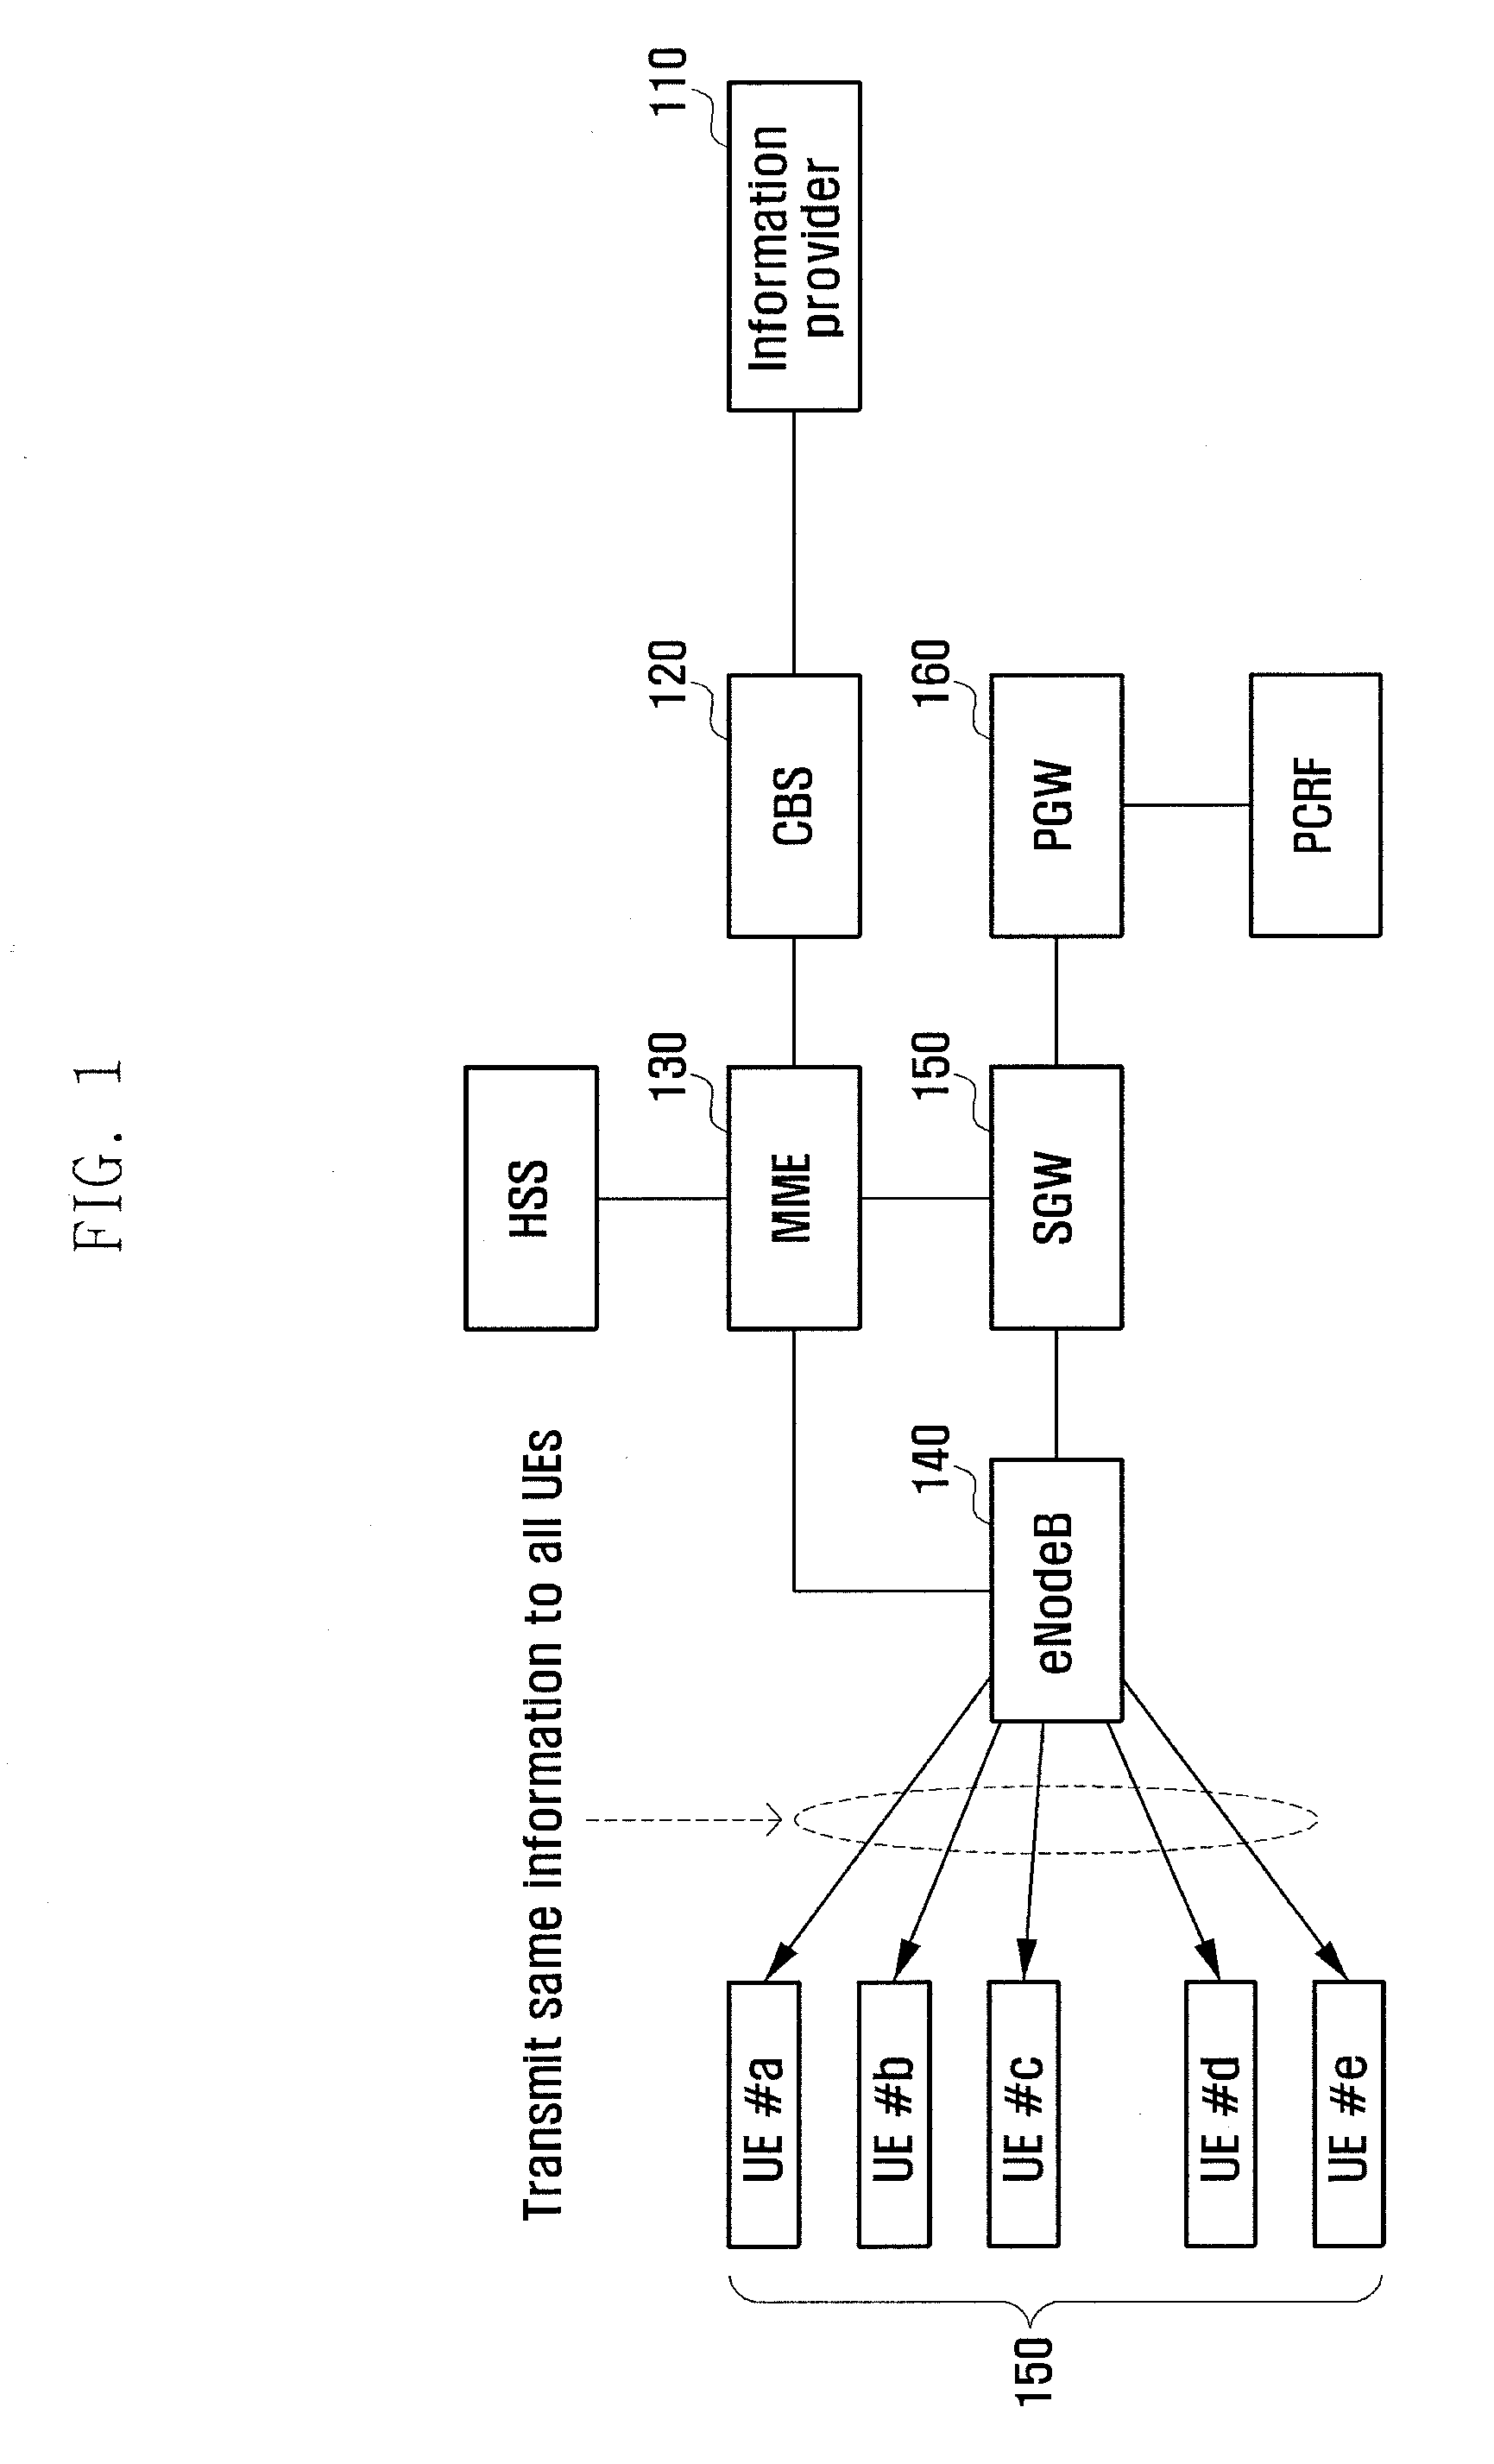 Method and apparatus for reliably transmitting group multicast using a cell broadcasting technique in a mobile communication system